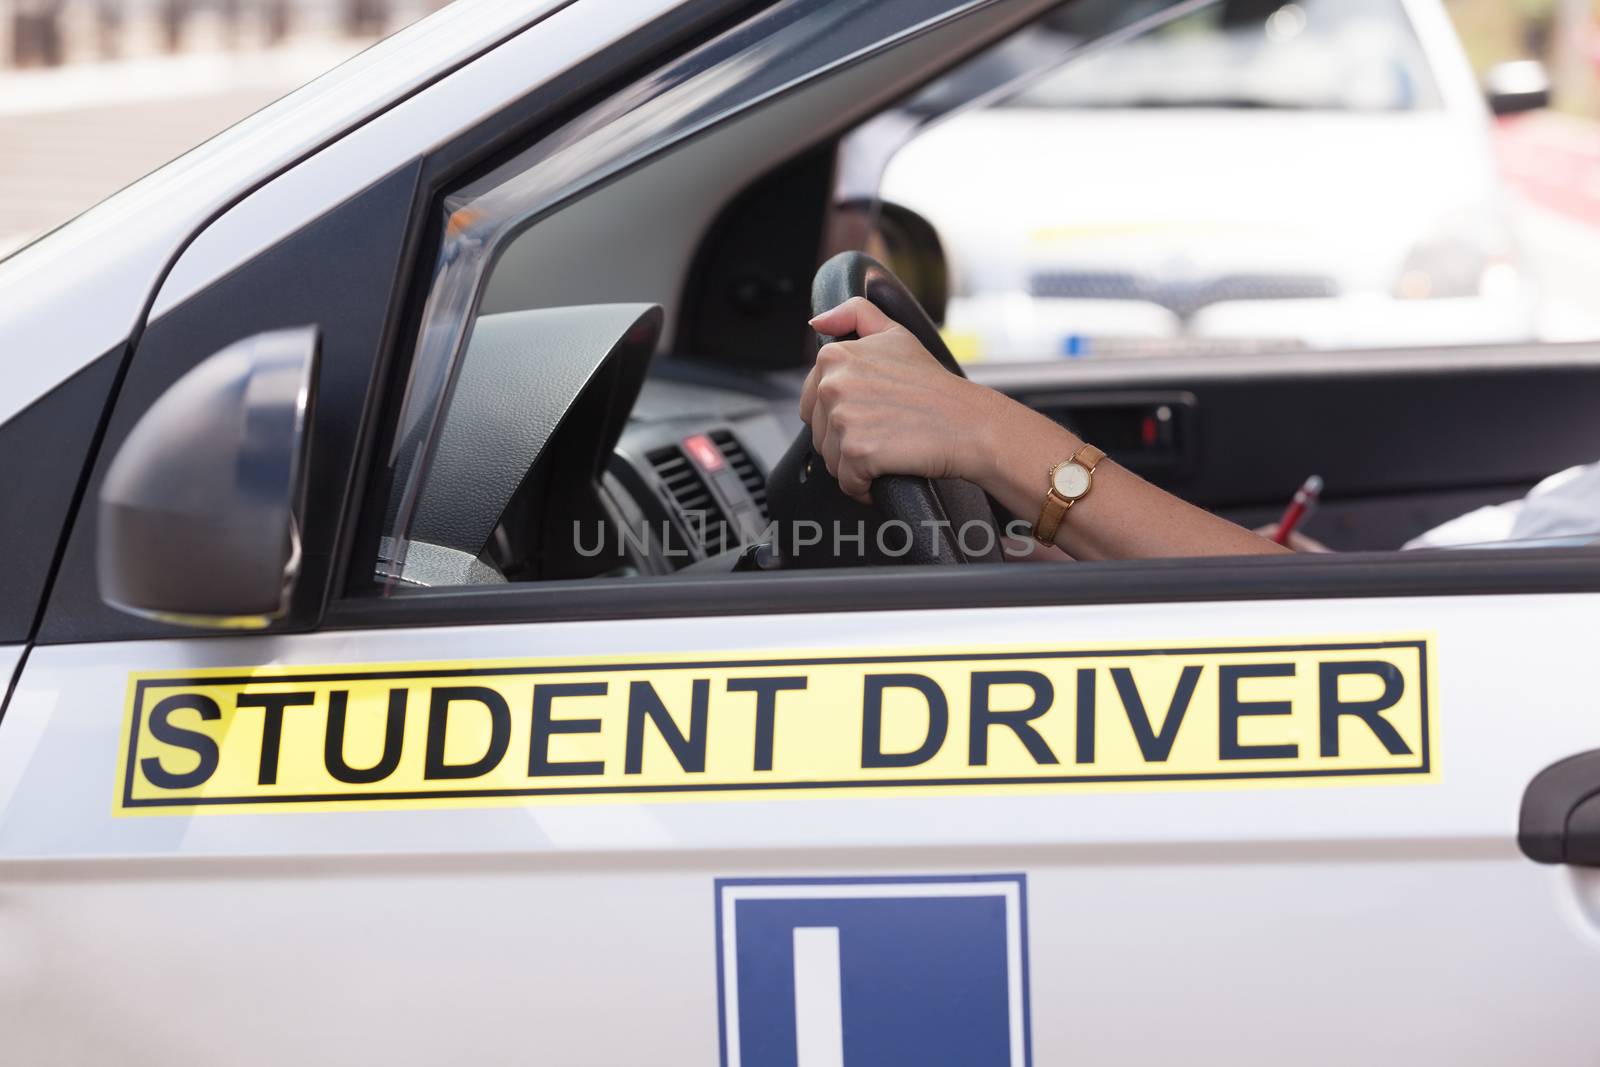 Driving education. Student driver. by wellphoto